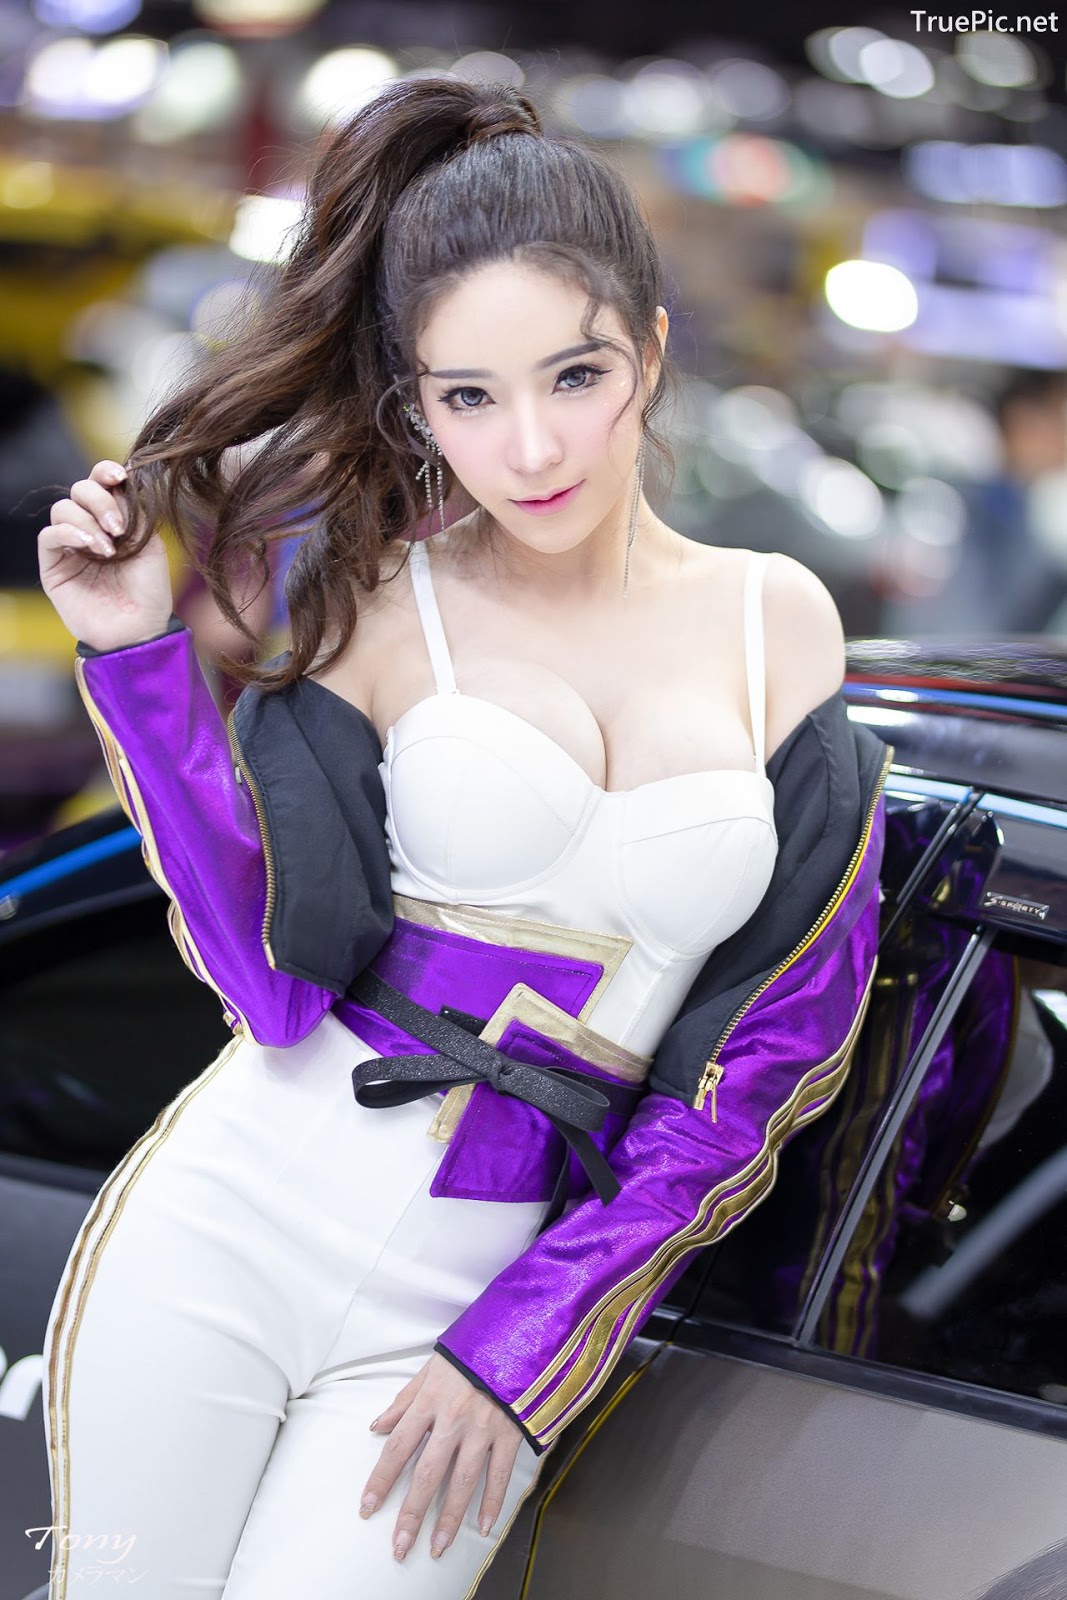 Image-Thailand-Hot-Model-Thai-Racing-Girl-At-Motor-Expo-2019-TruePic.net- Picture-26